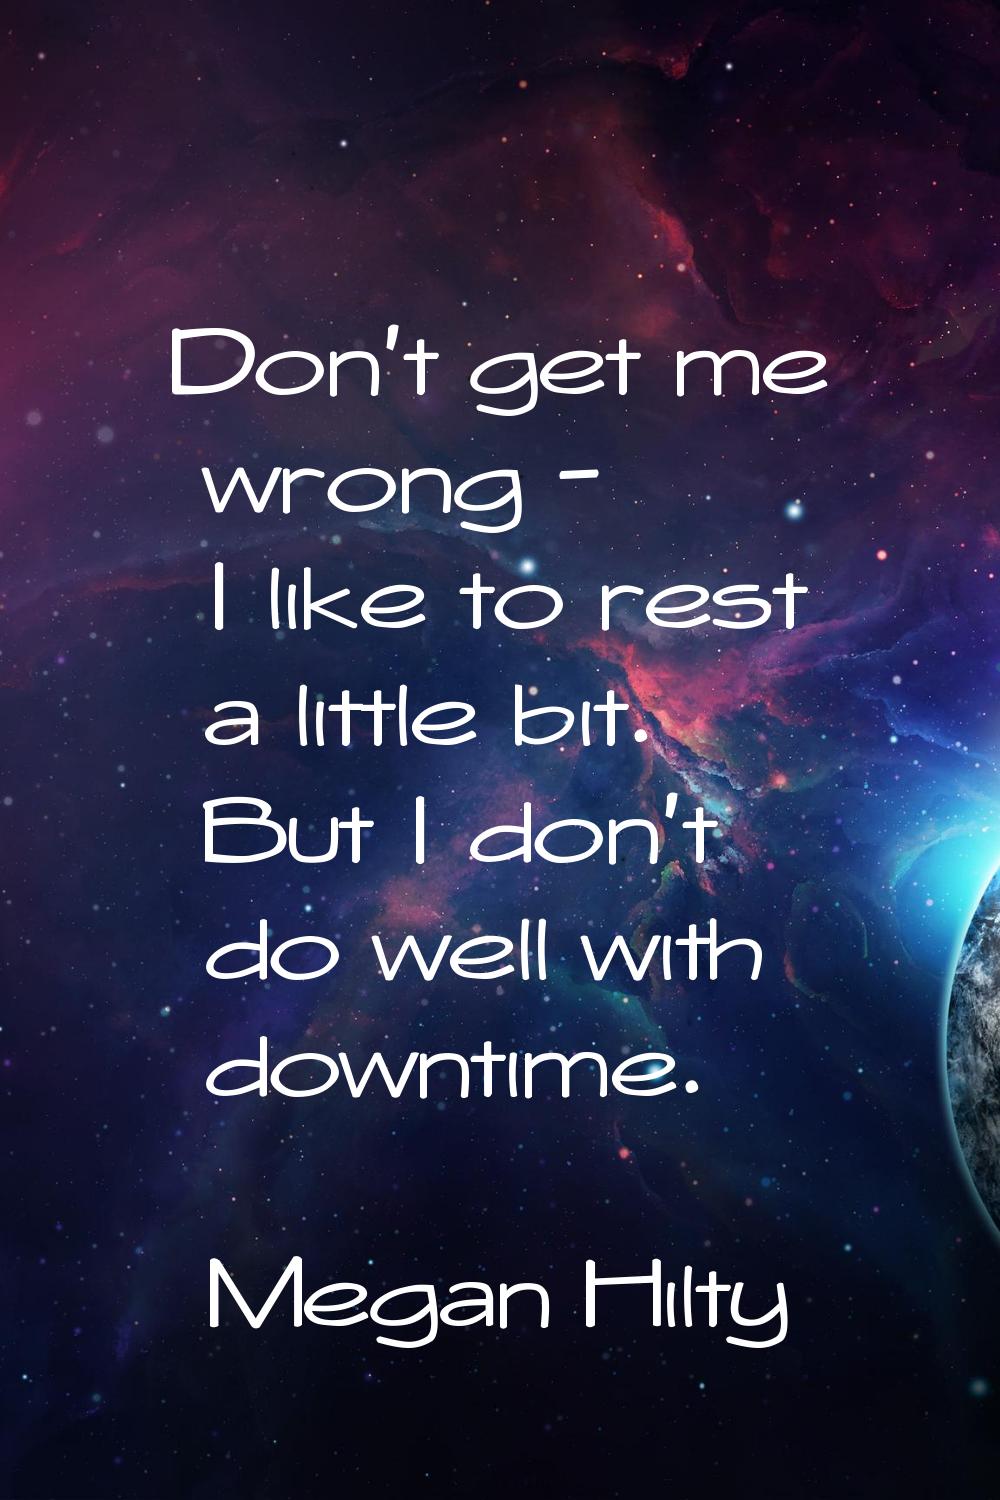 Don't get me wrong - I like to rest a little bit. But I don't do well with downtime.